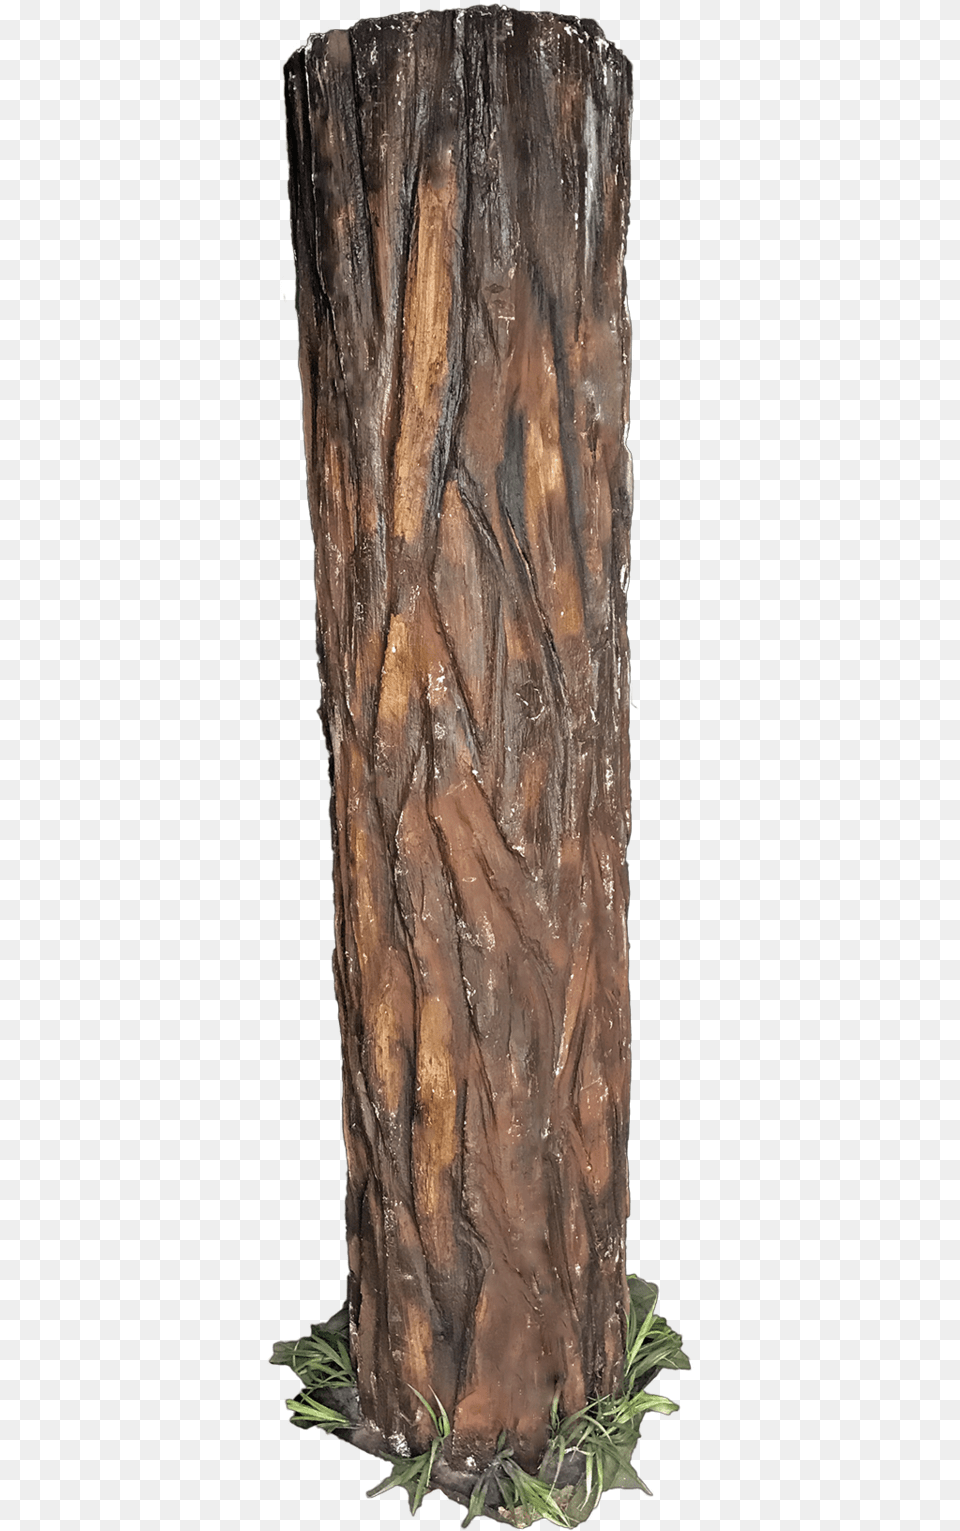 Tree Log Tree Trunk Transparent Background, Plant, Tree Trunk Png Image